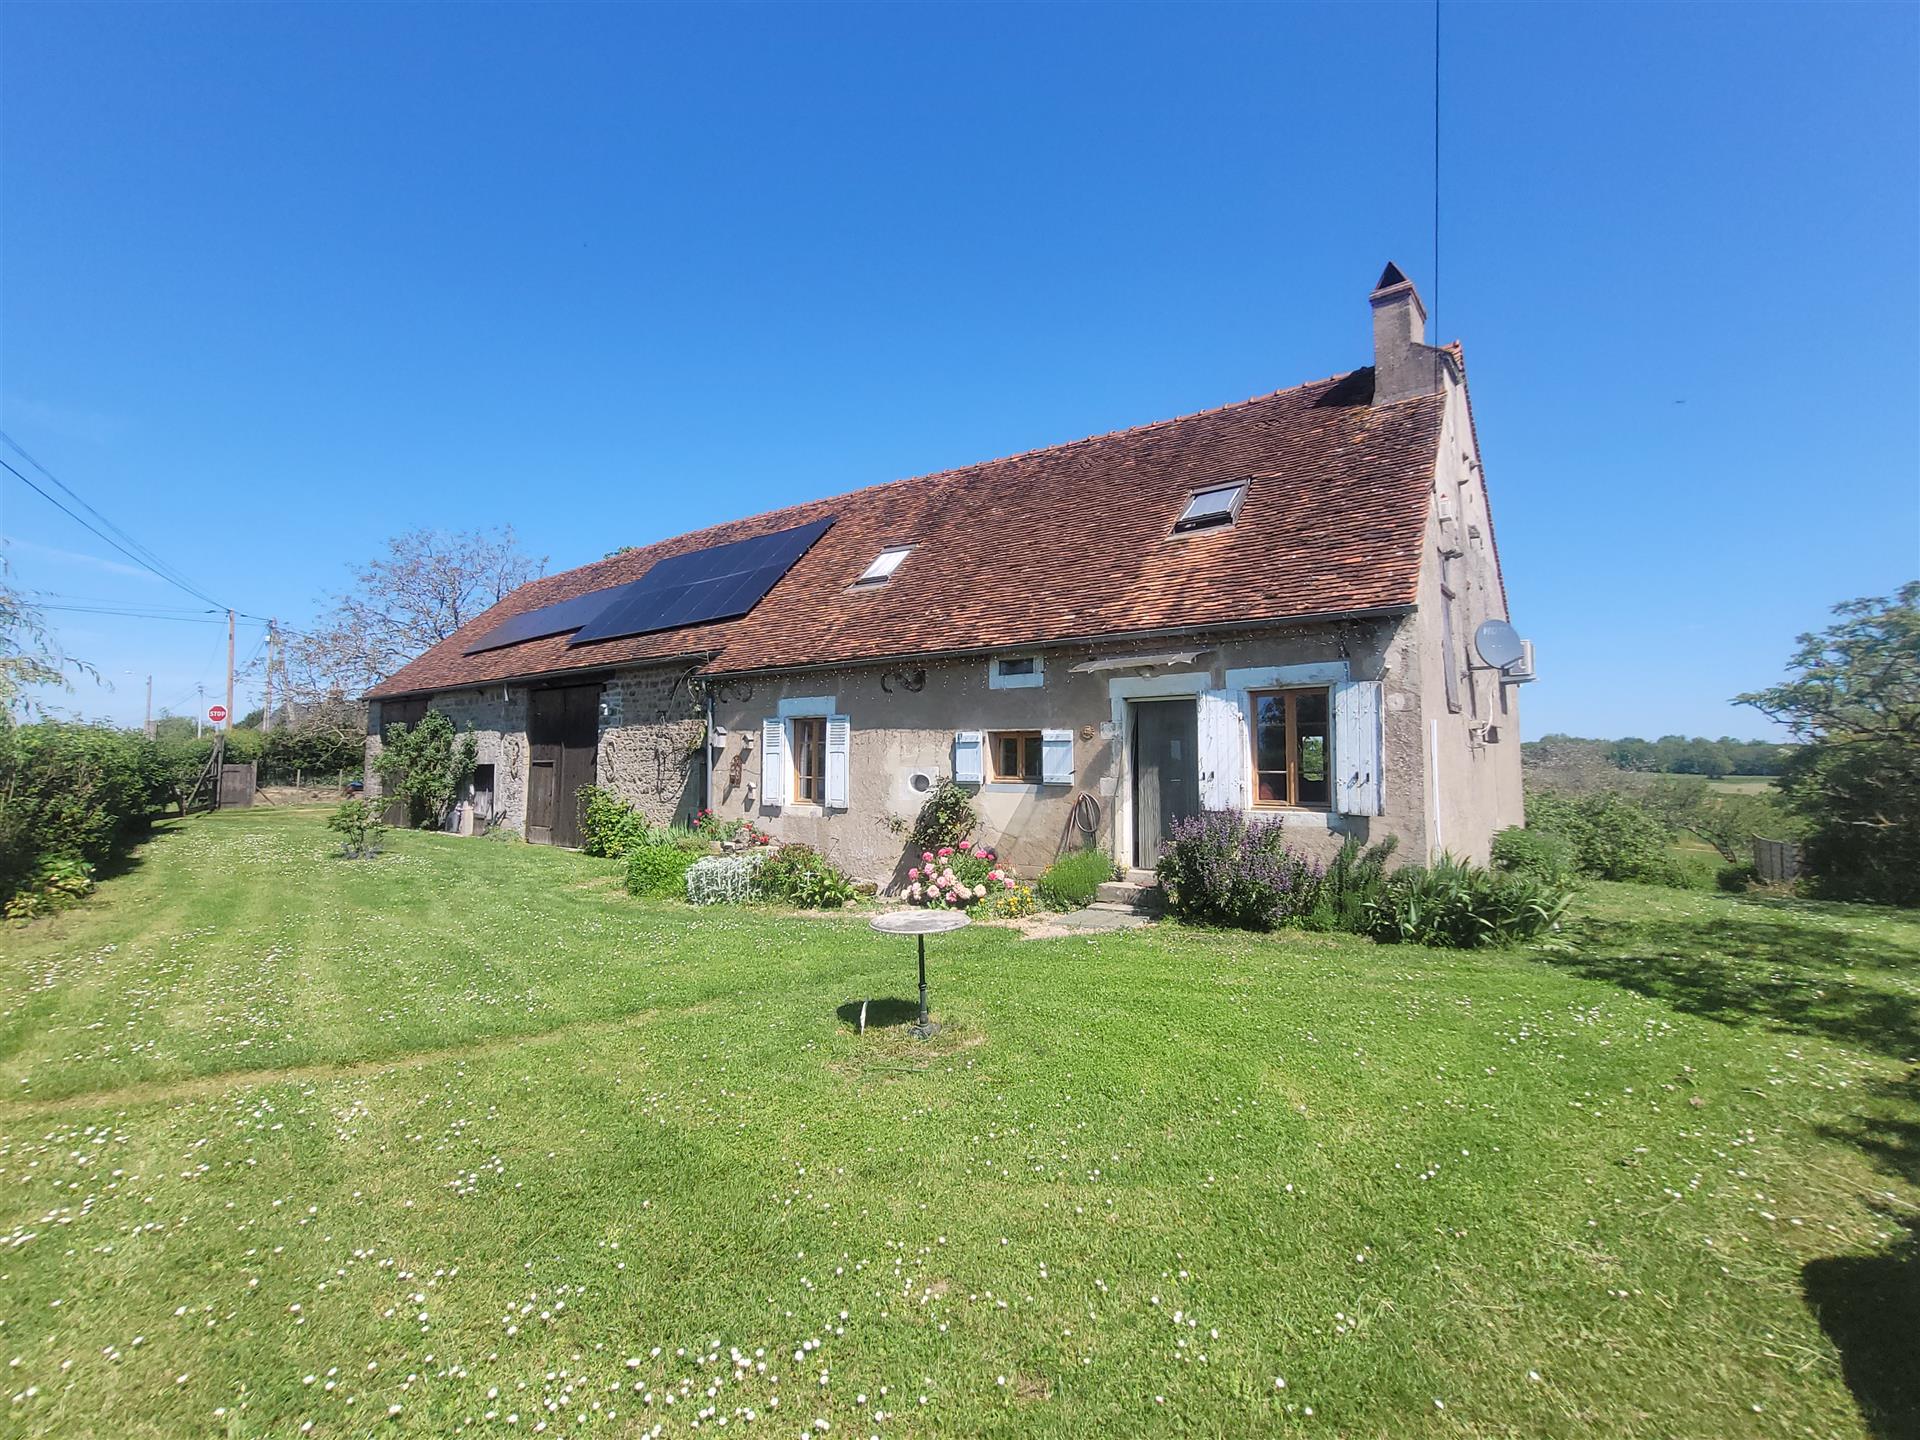 For sale, renovated farmhouse in small hamlet (Alluy, 58110)